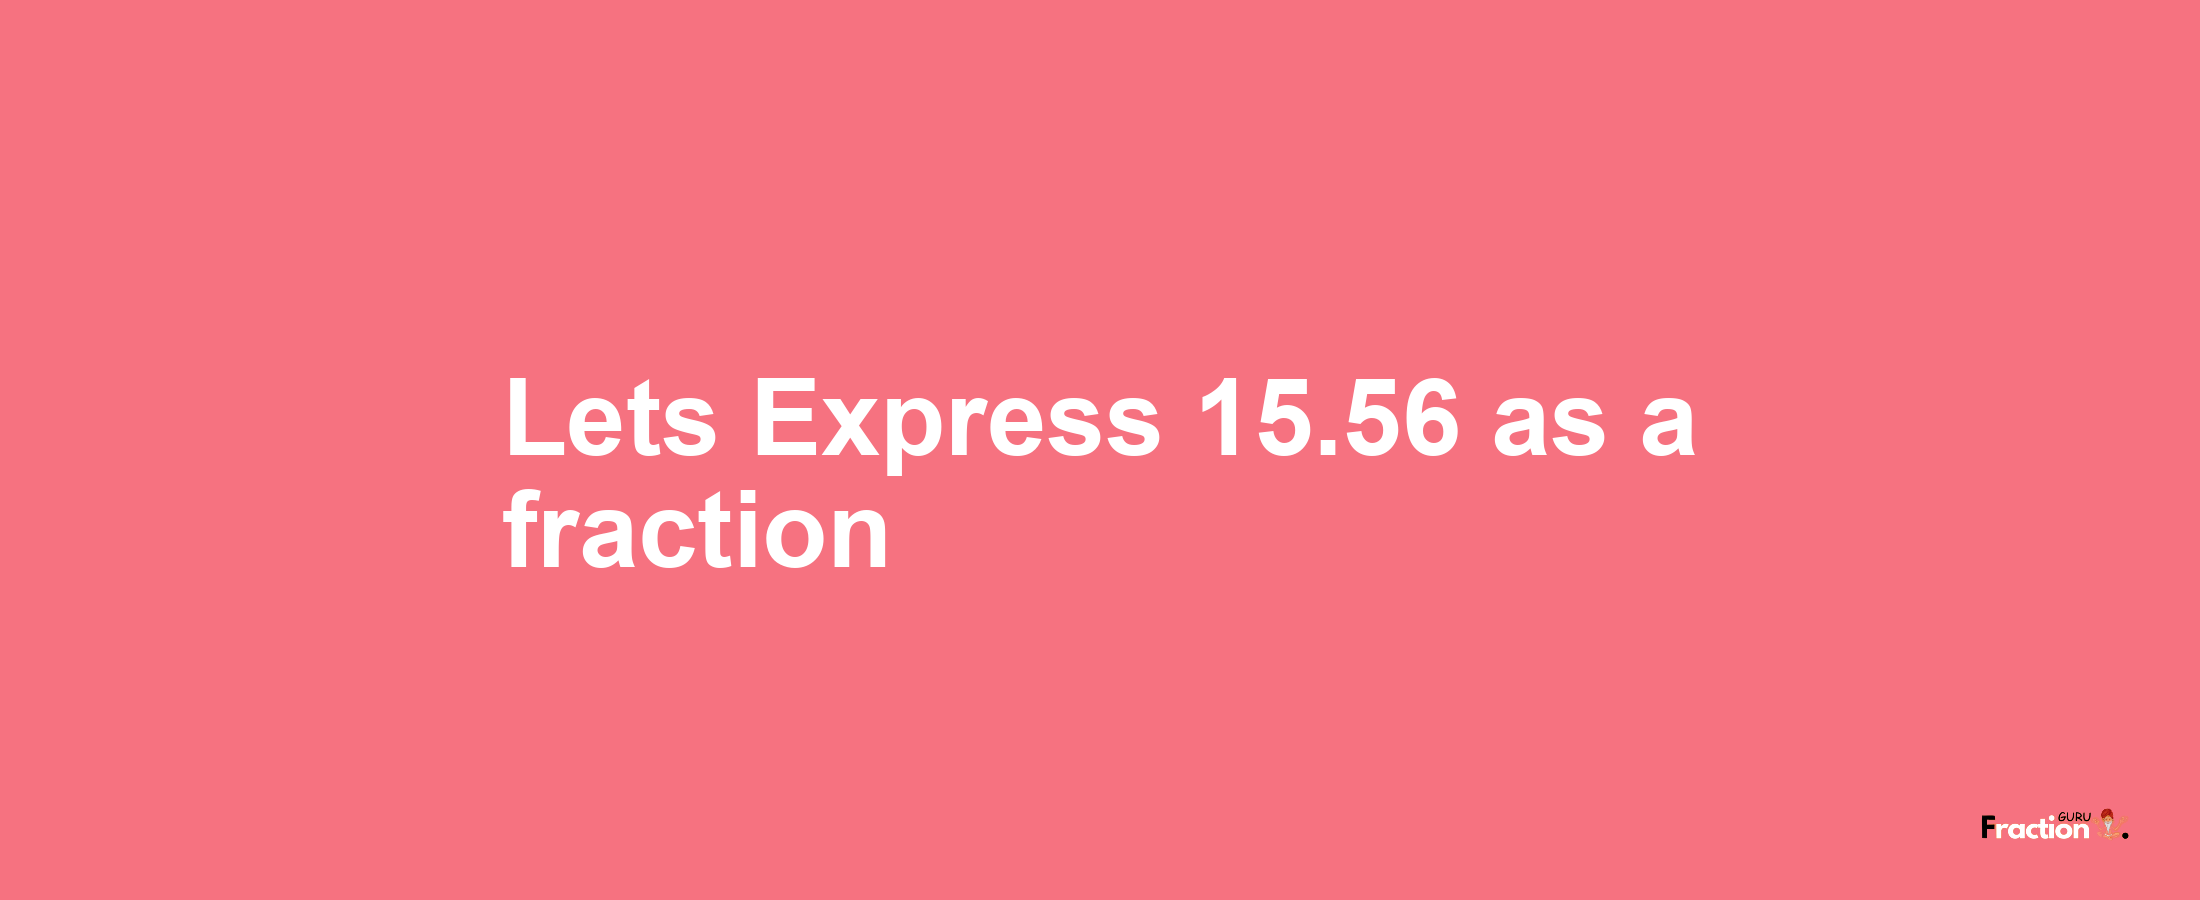 Lets Express 15.56 as afraction